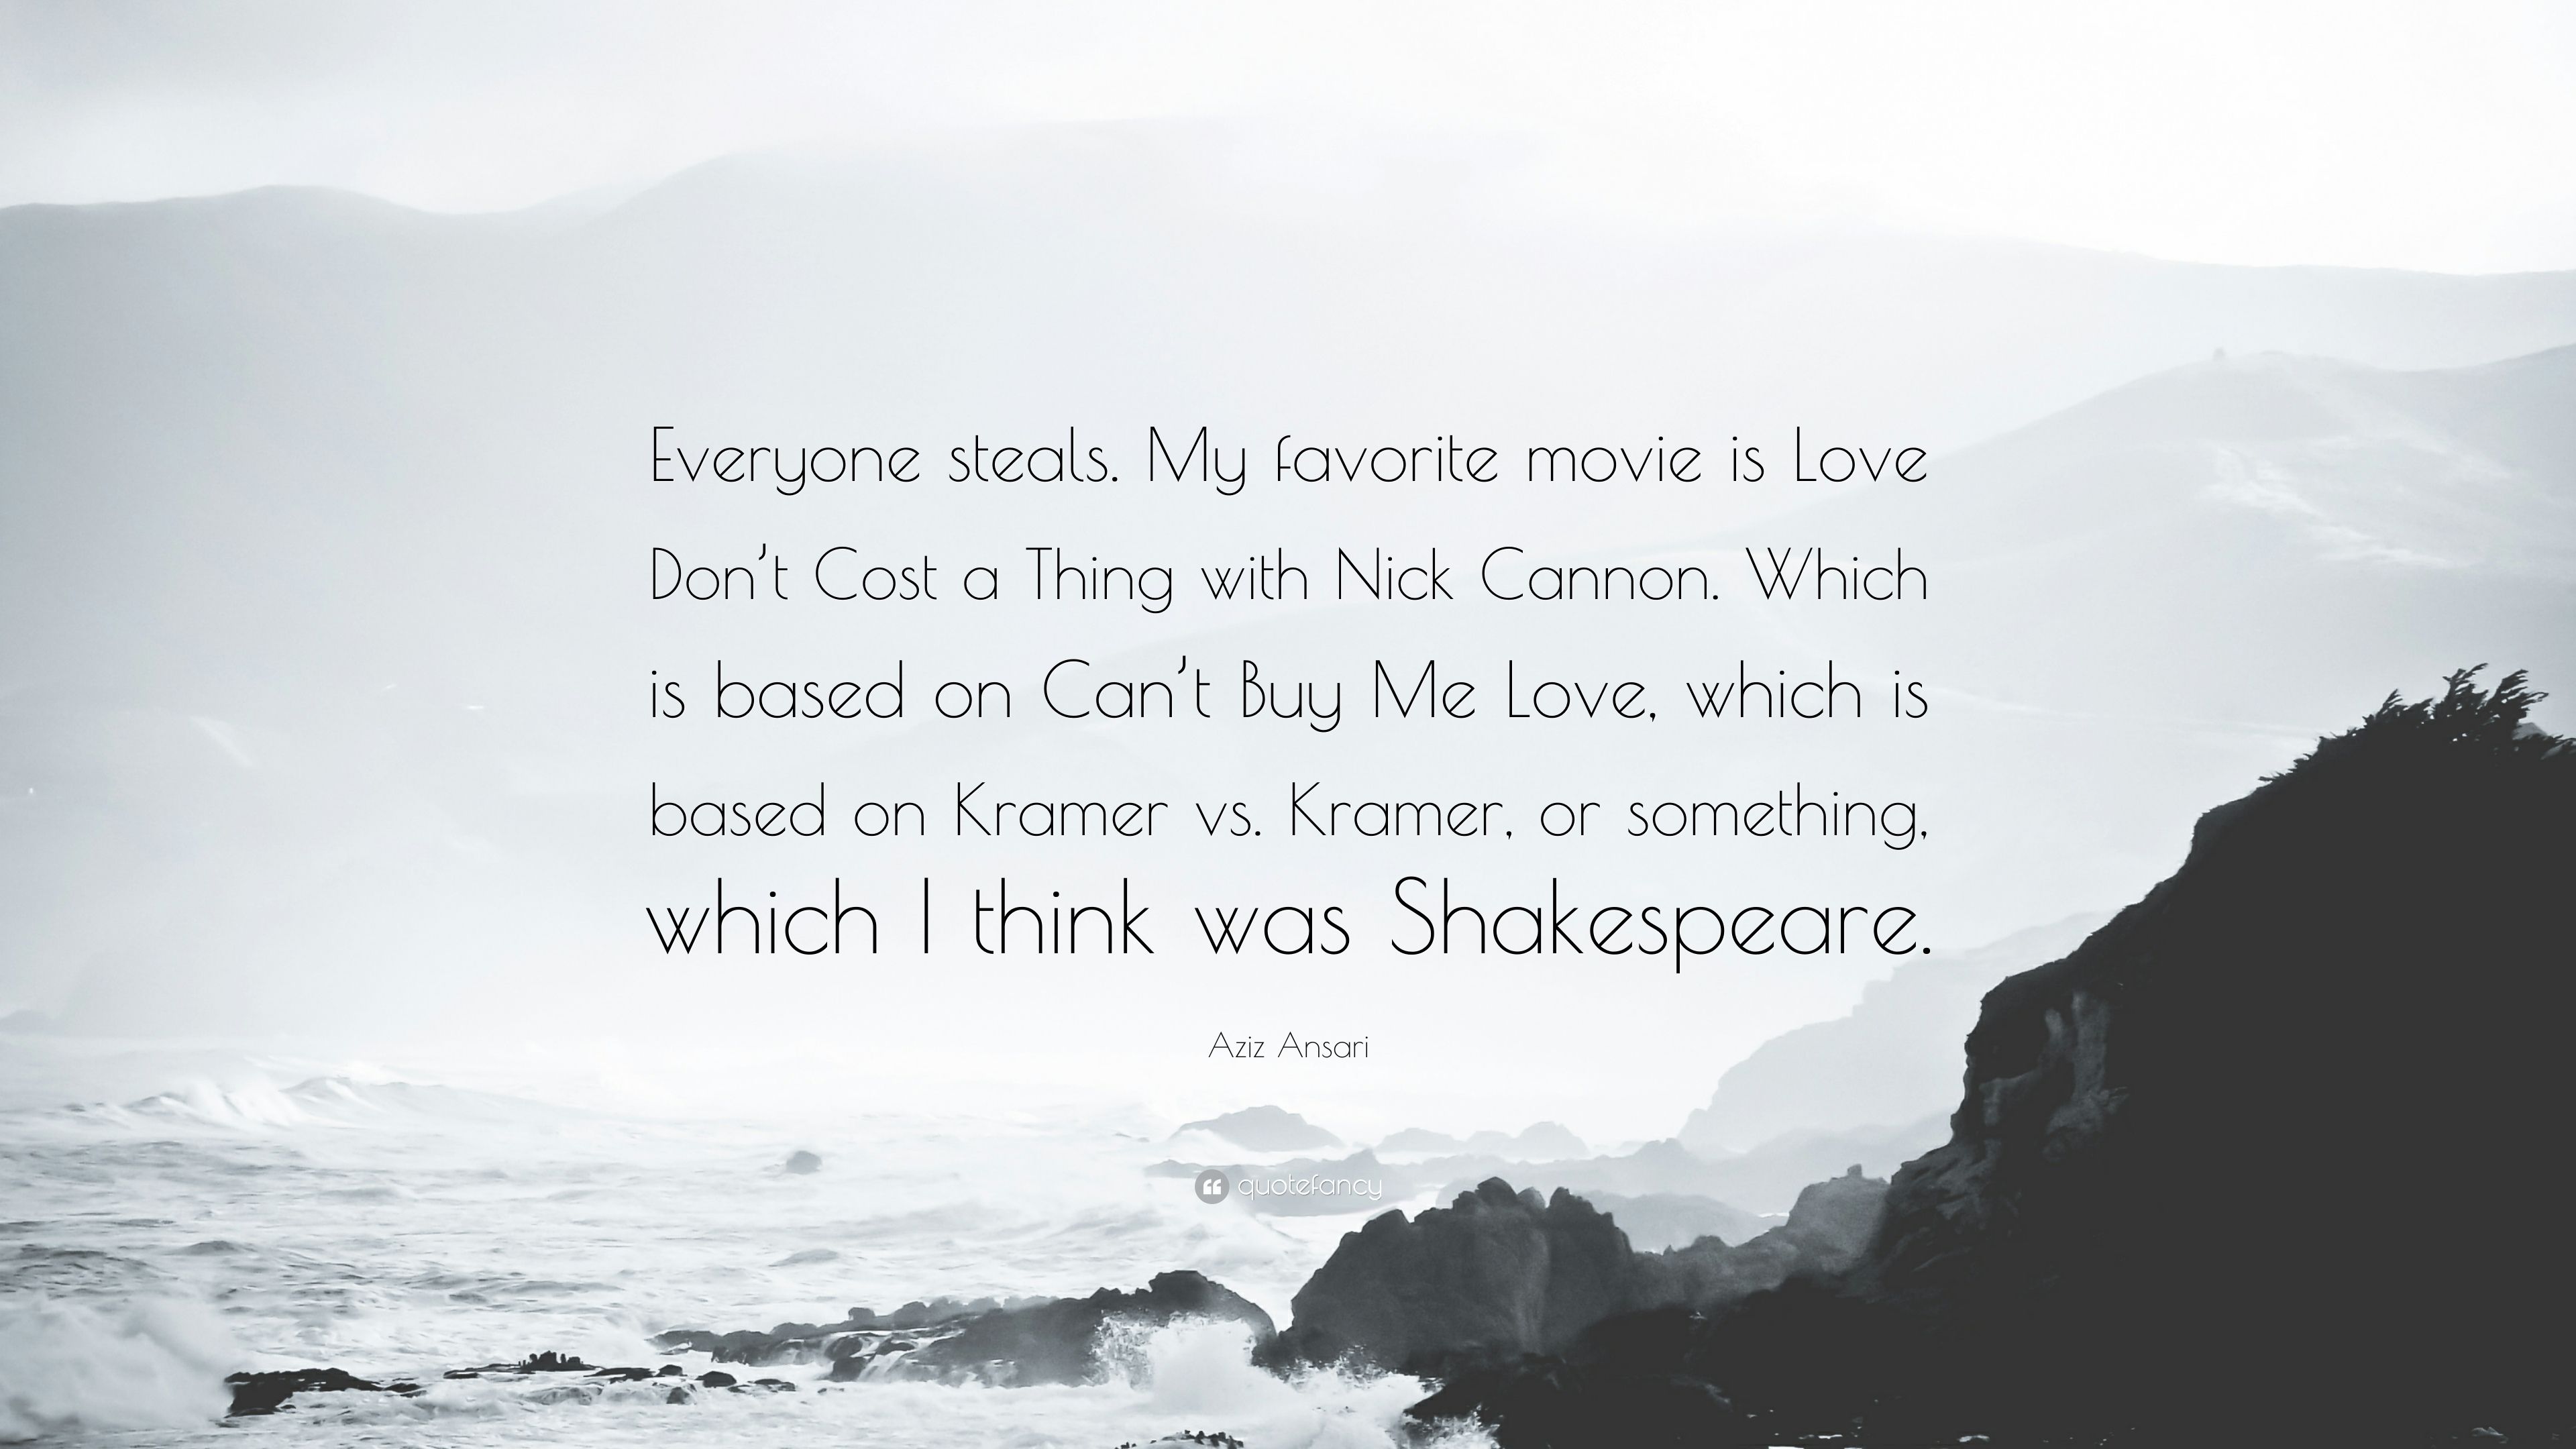 Aziz Ansari Quote: “Everyone steals. My favorite movie is Love Don